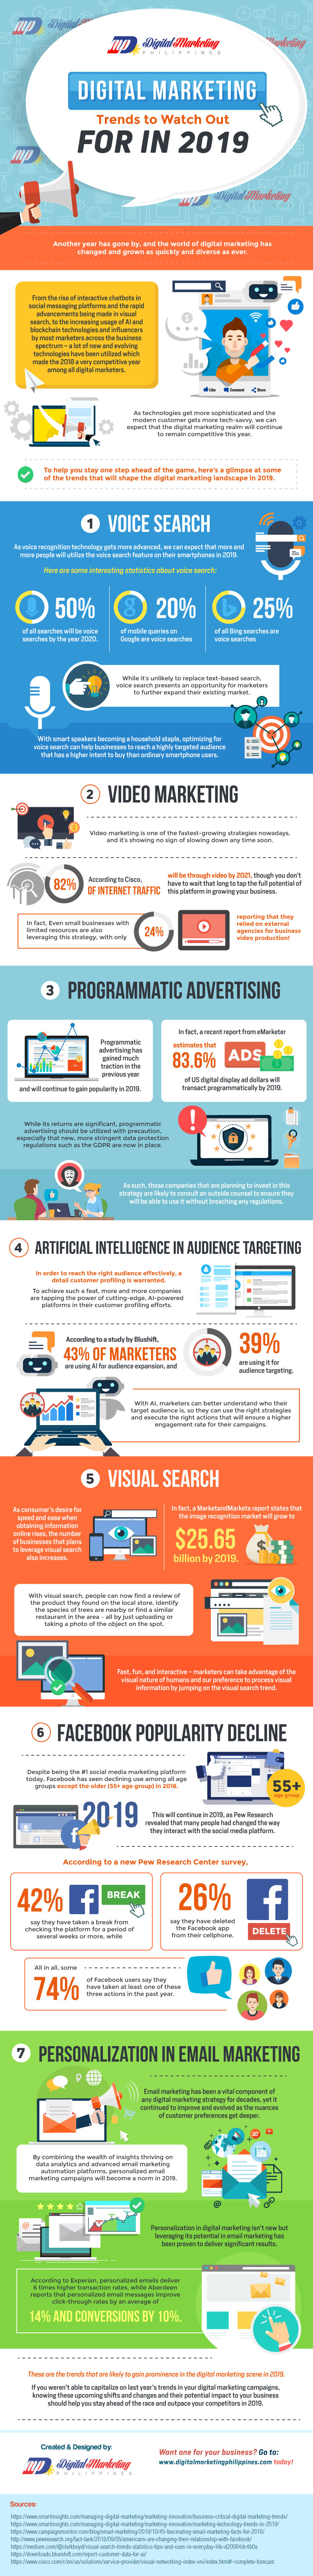 Digital Marketing Trends to Watch Out for 2019 [Infographic]